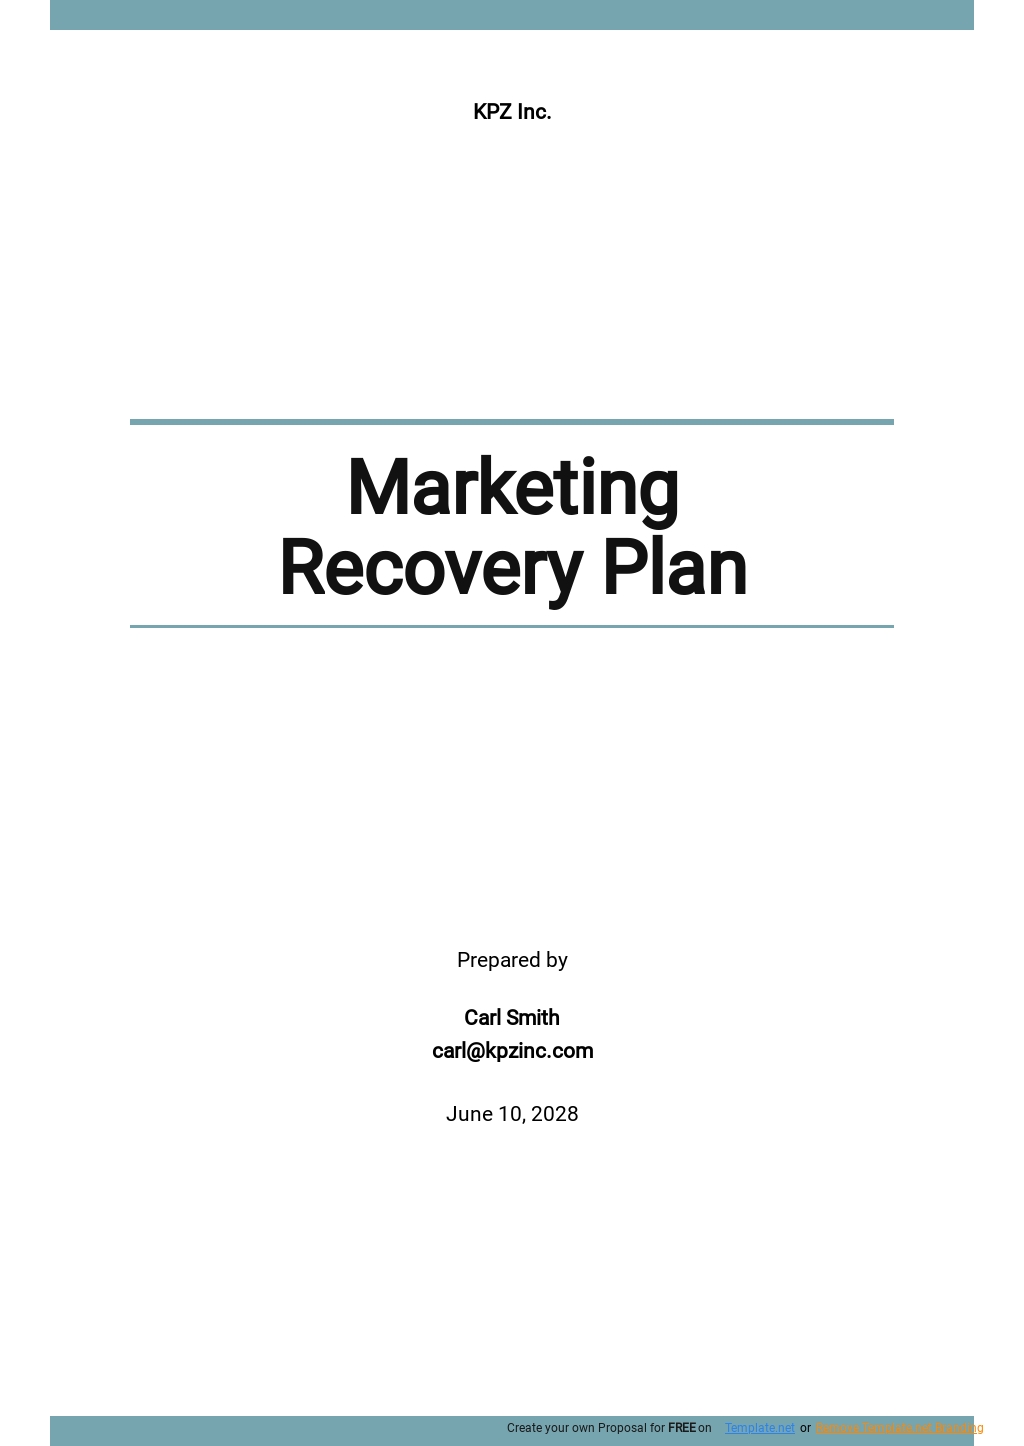 Marketing Recovery Plan Template